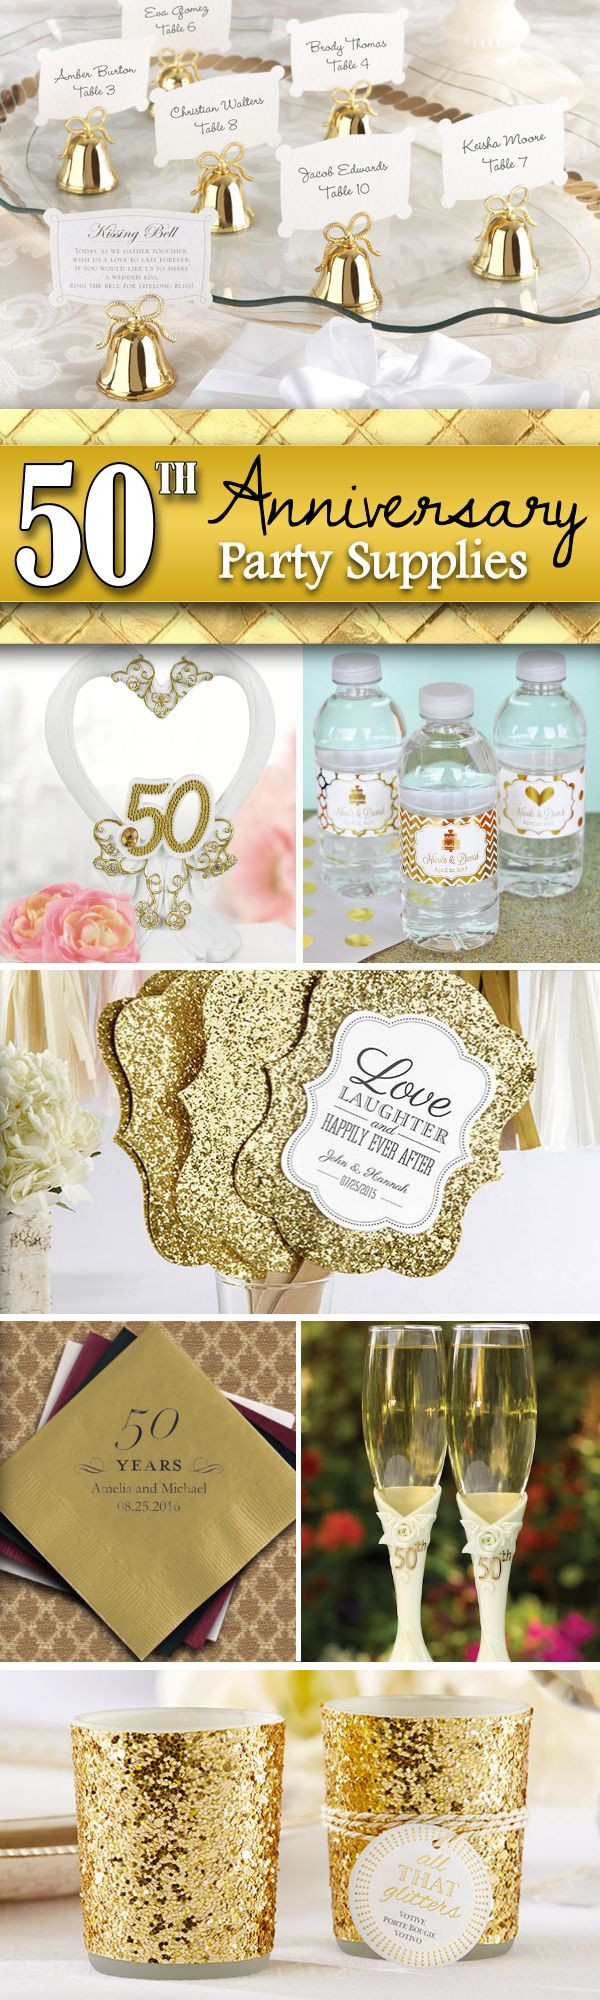 50th Wedding Anniversary Favors
 Throwing a 50th Wedding Anniversary Party Get all the